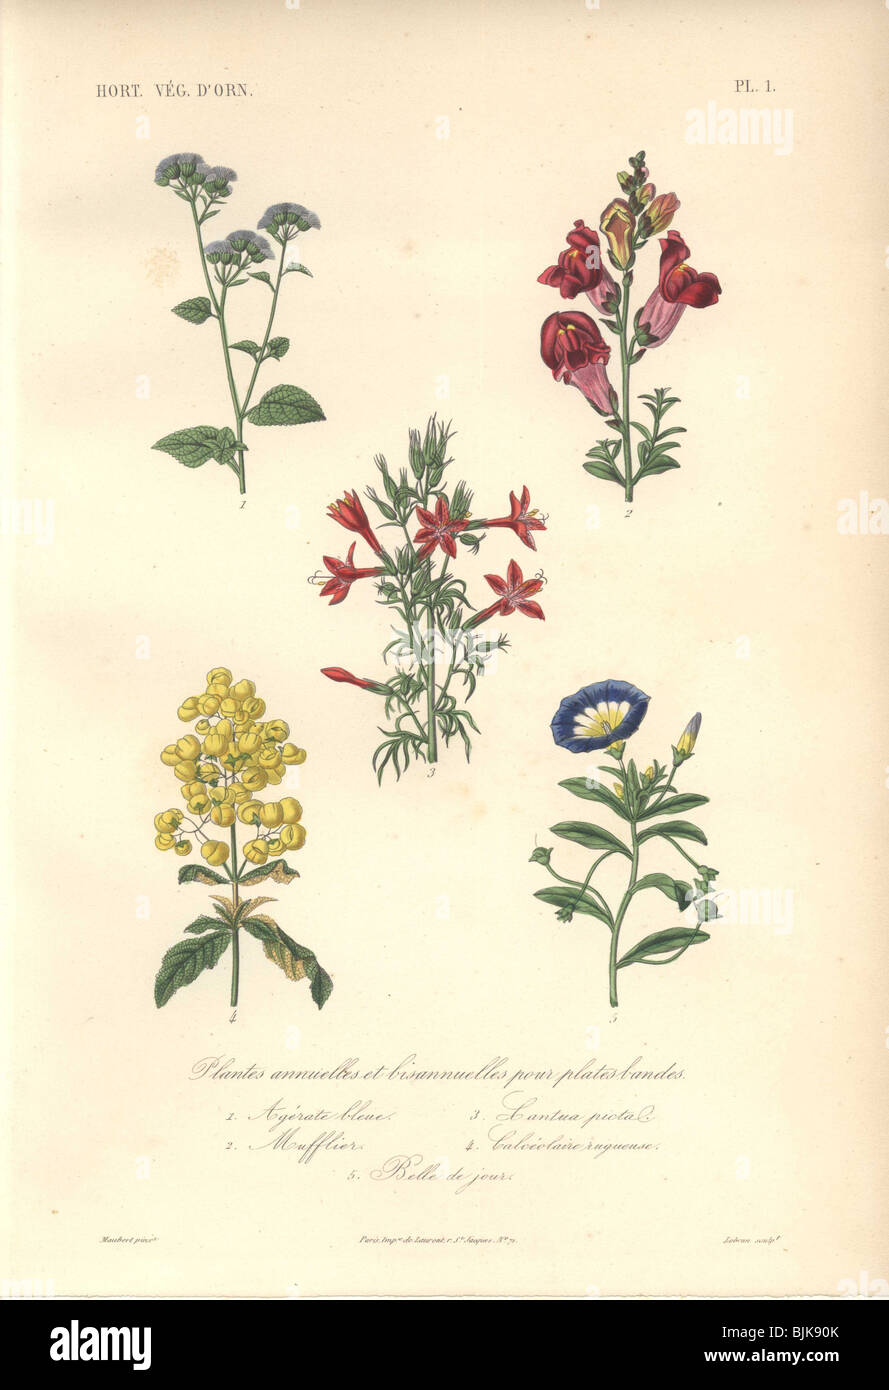 Decorative botanical print with flossflower, snapdragon, cantuta, and ladies purse from Herincq's 'Regne Vegetal' (1865). Stock Photo